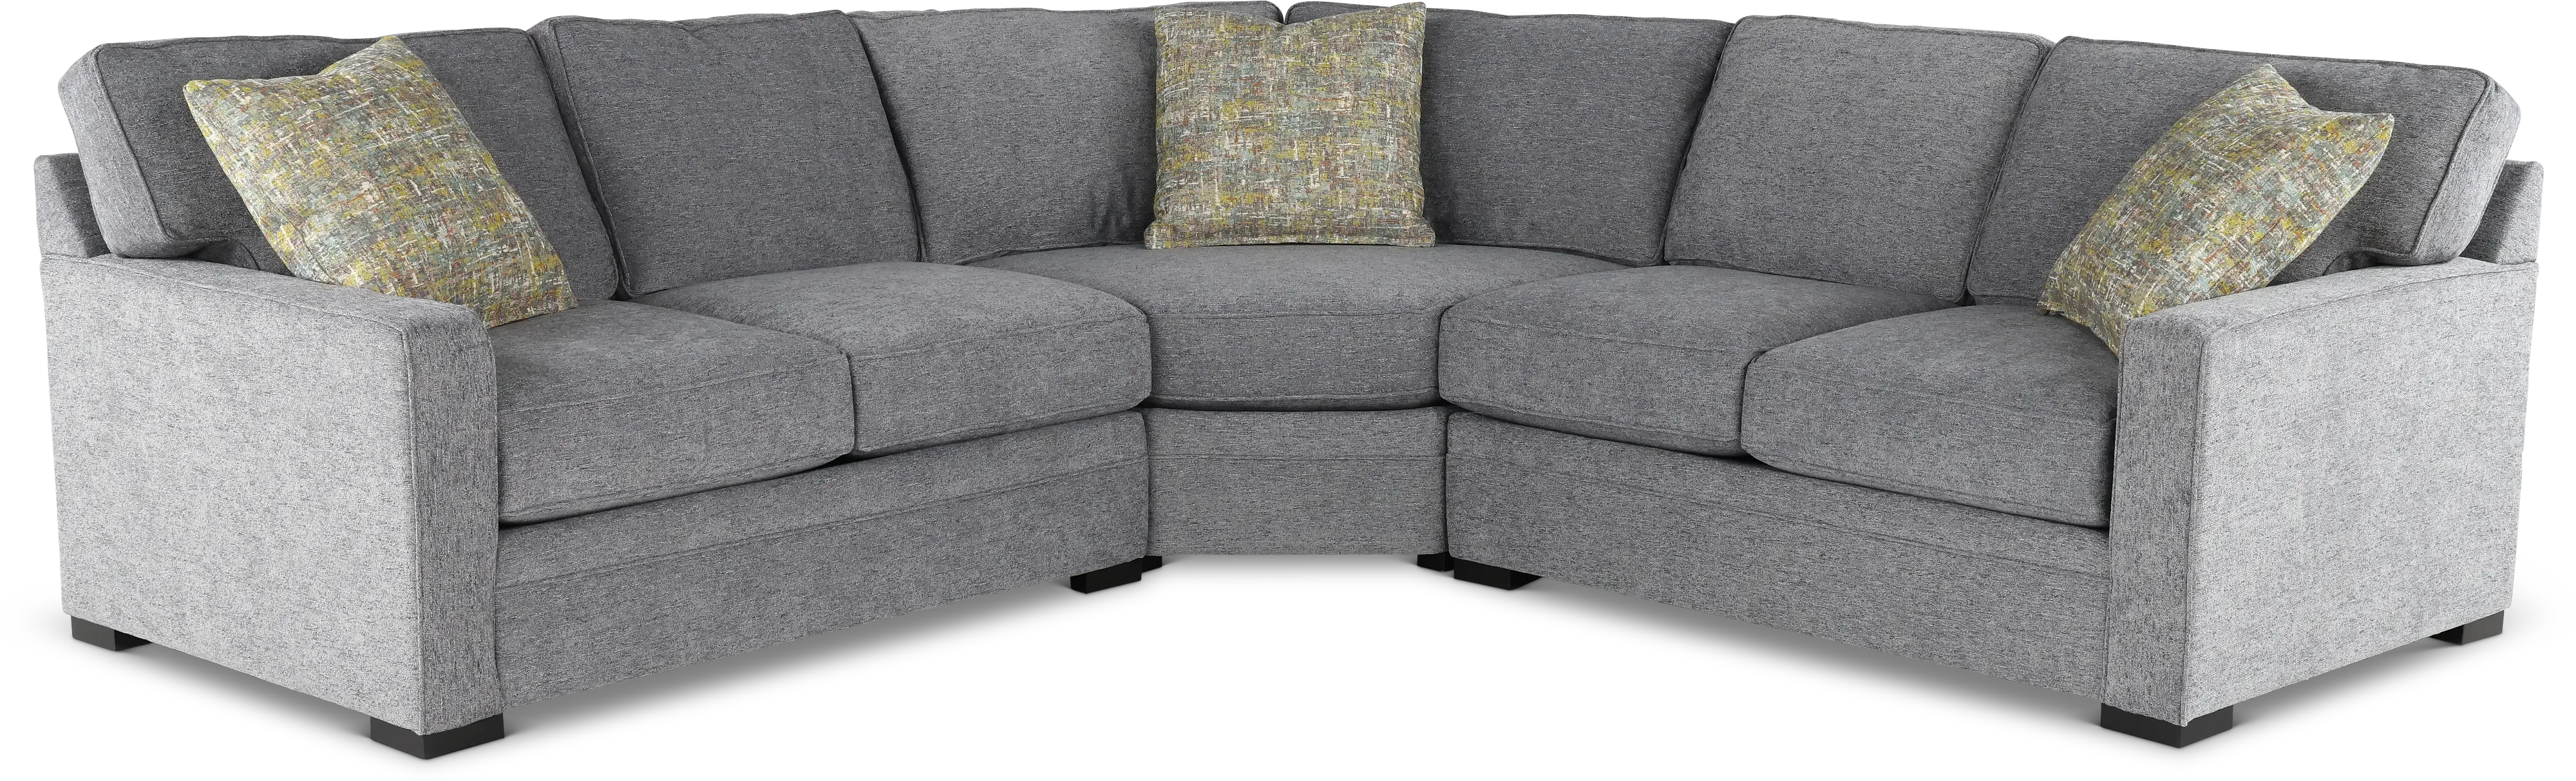 Juno Gray 3 Piece Sectional